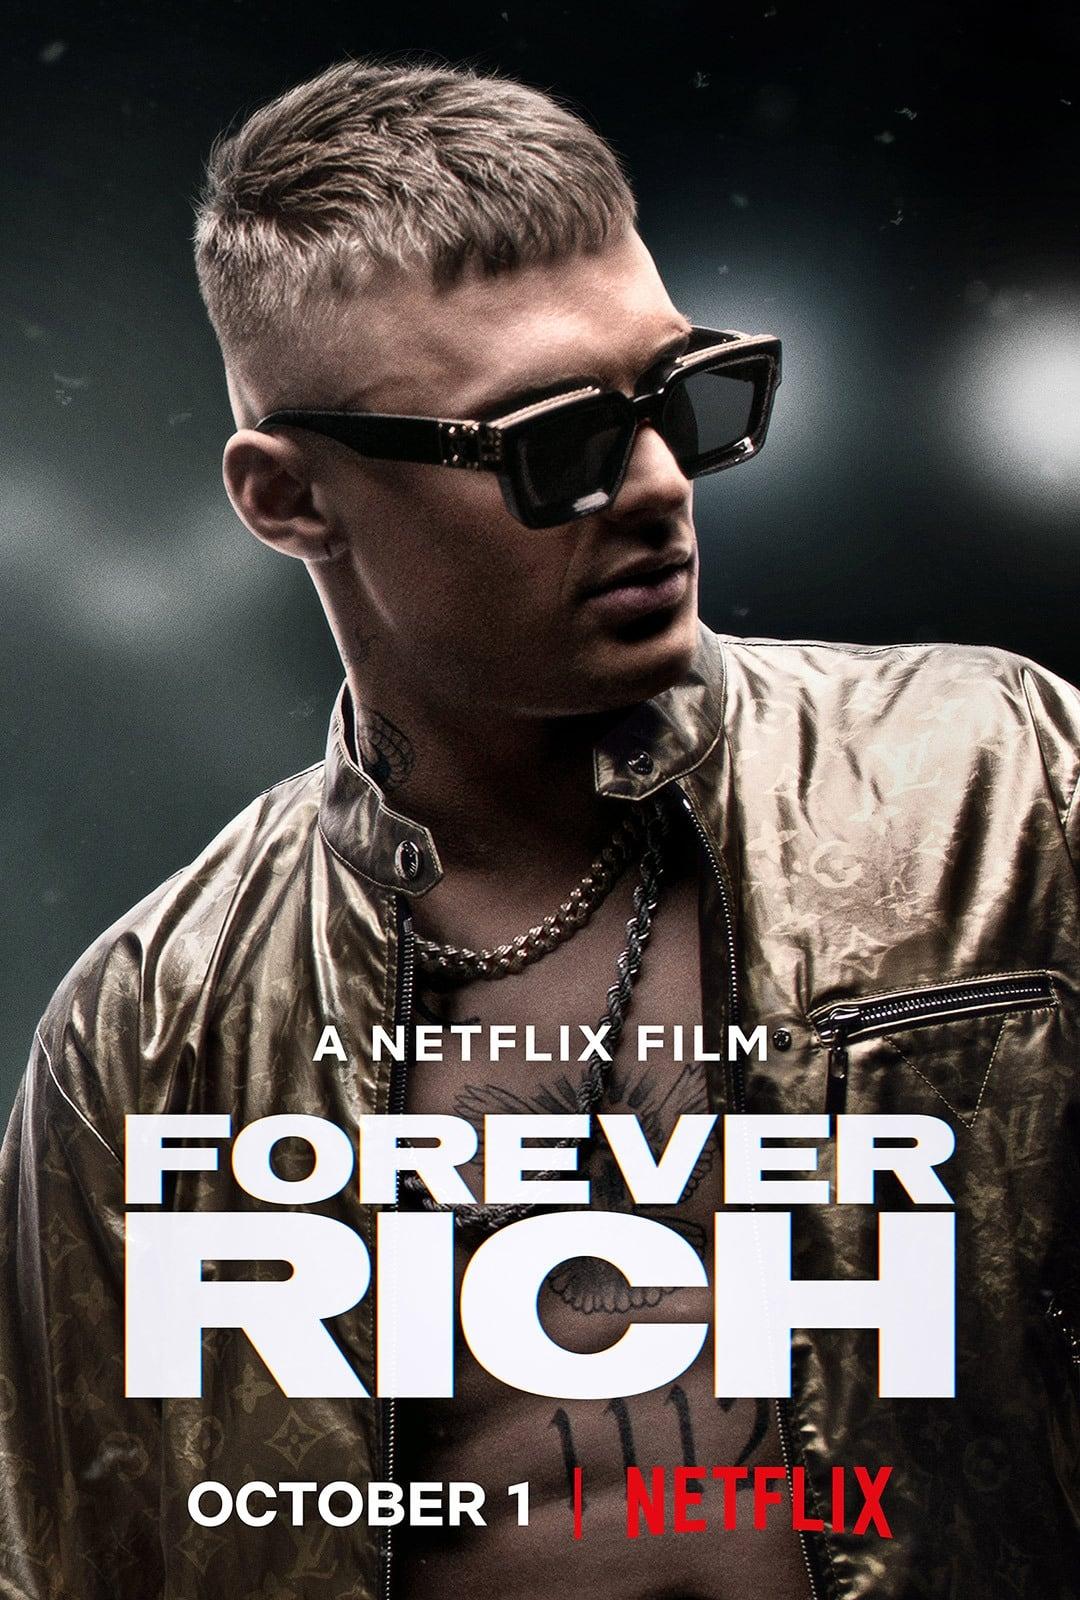 Forever Rich poster